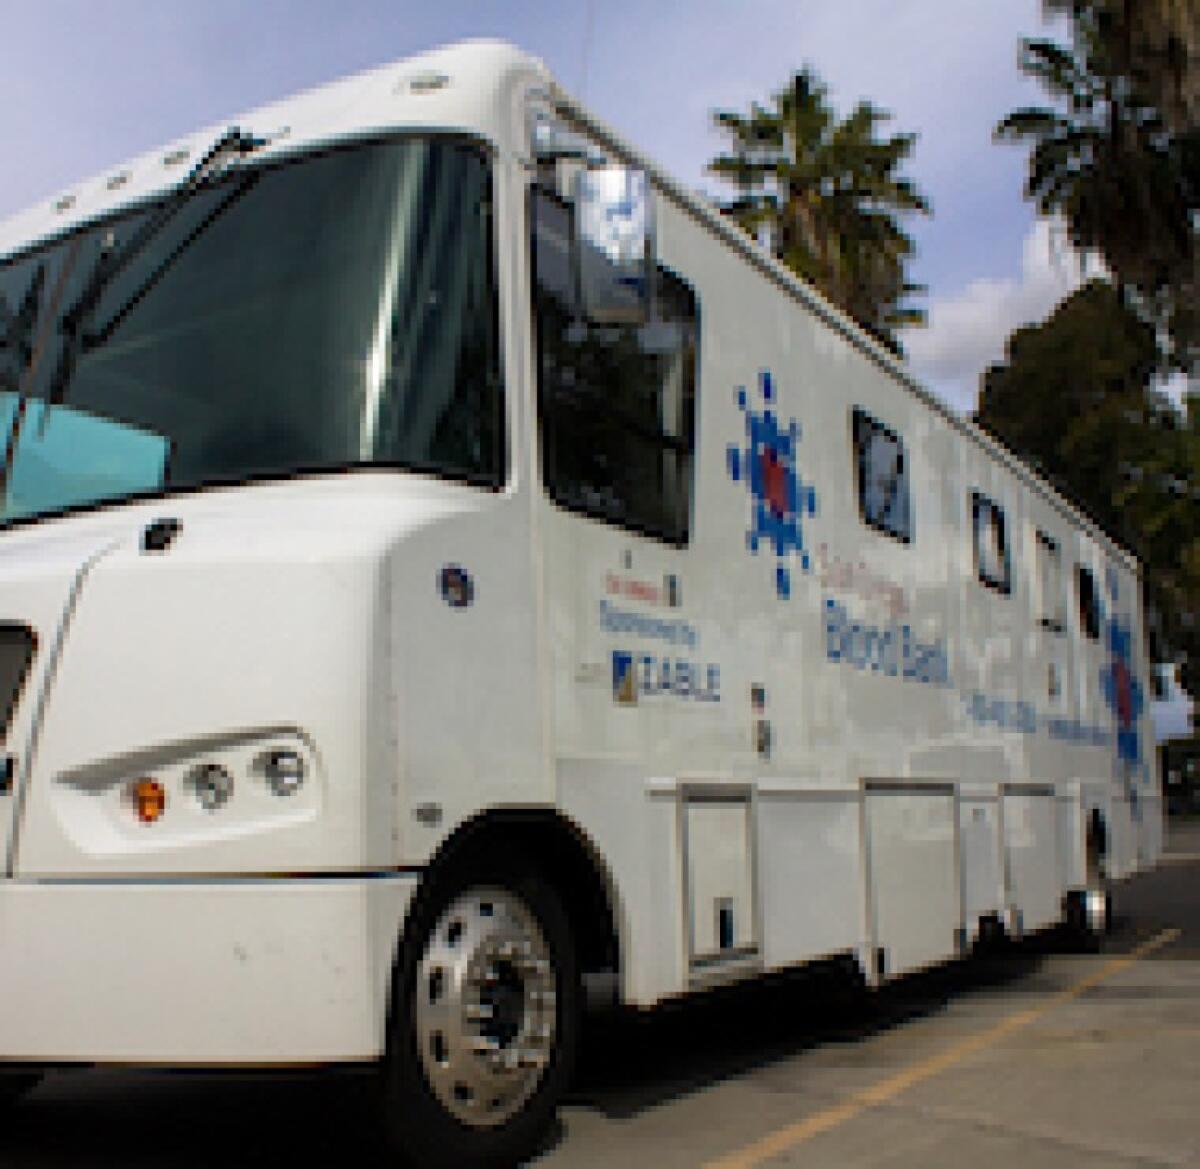 San Diego Blood Bank’s Mobile blood bank will be in Solana Beach and Carmel Valley and donors are sought.